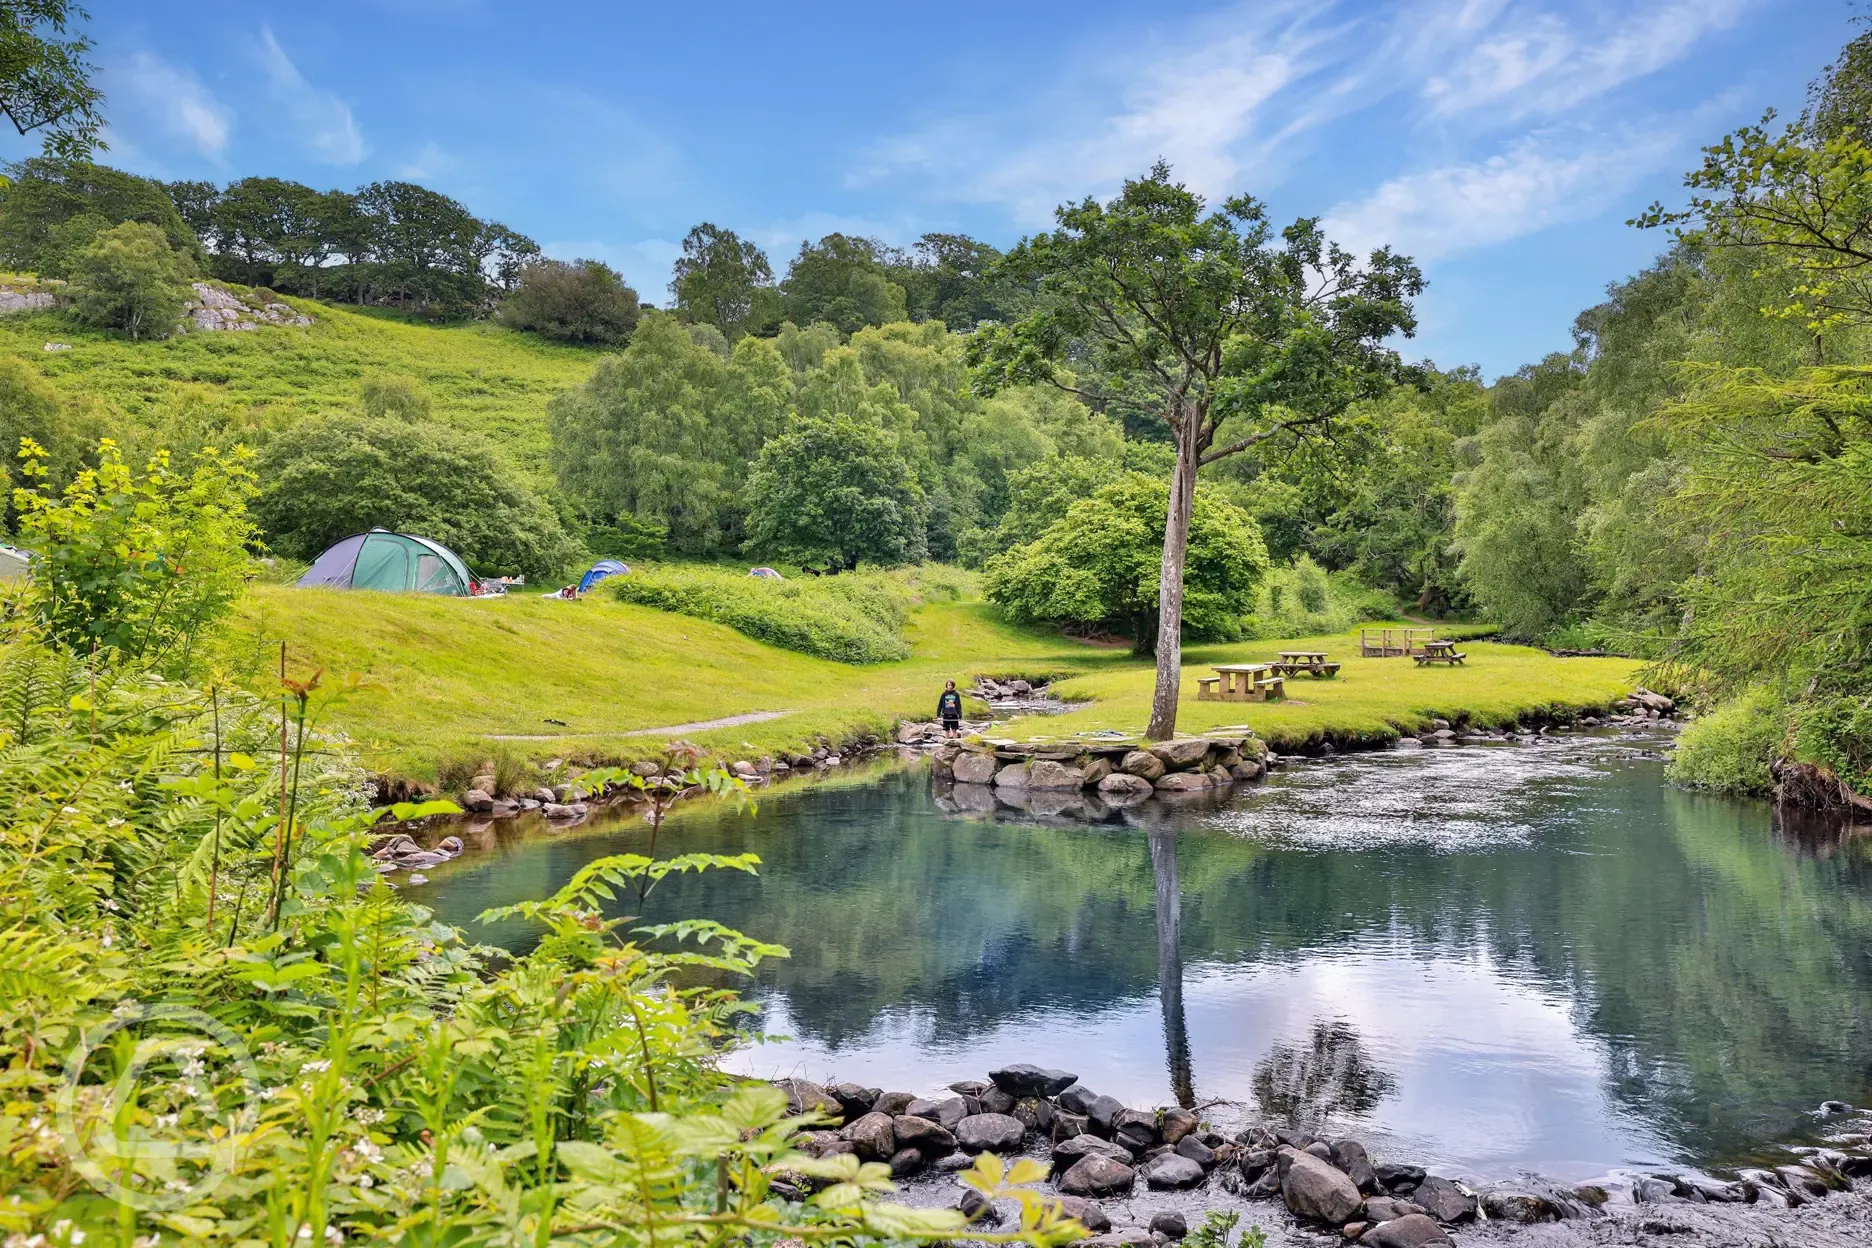 Grass camping pitches by the waterfall